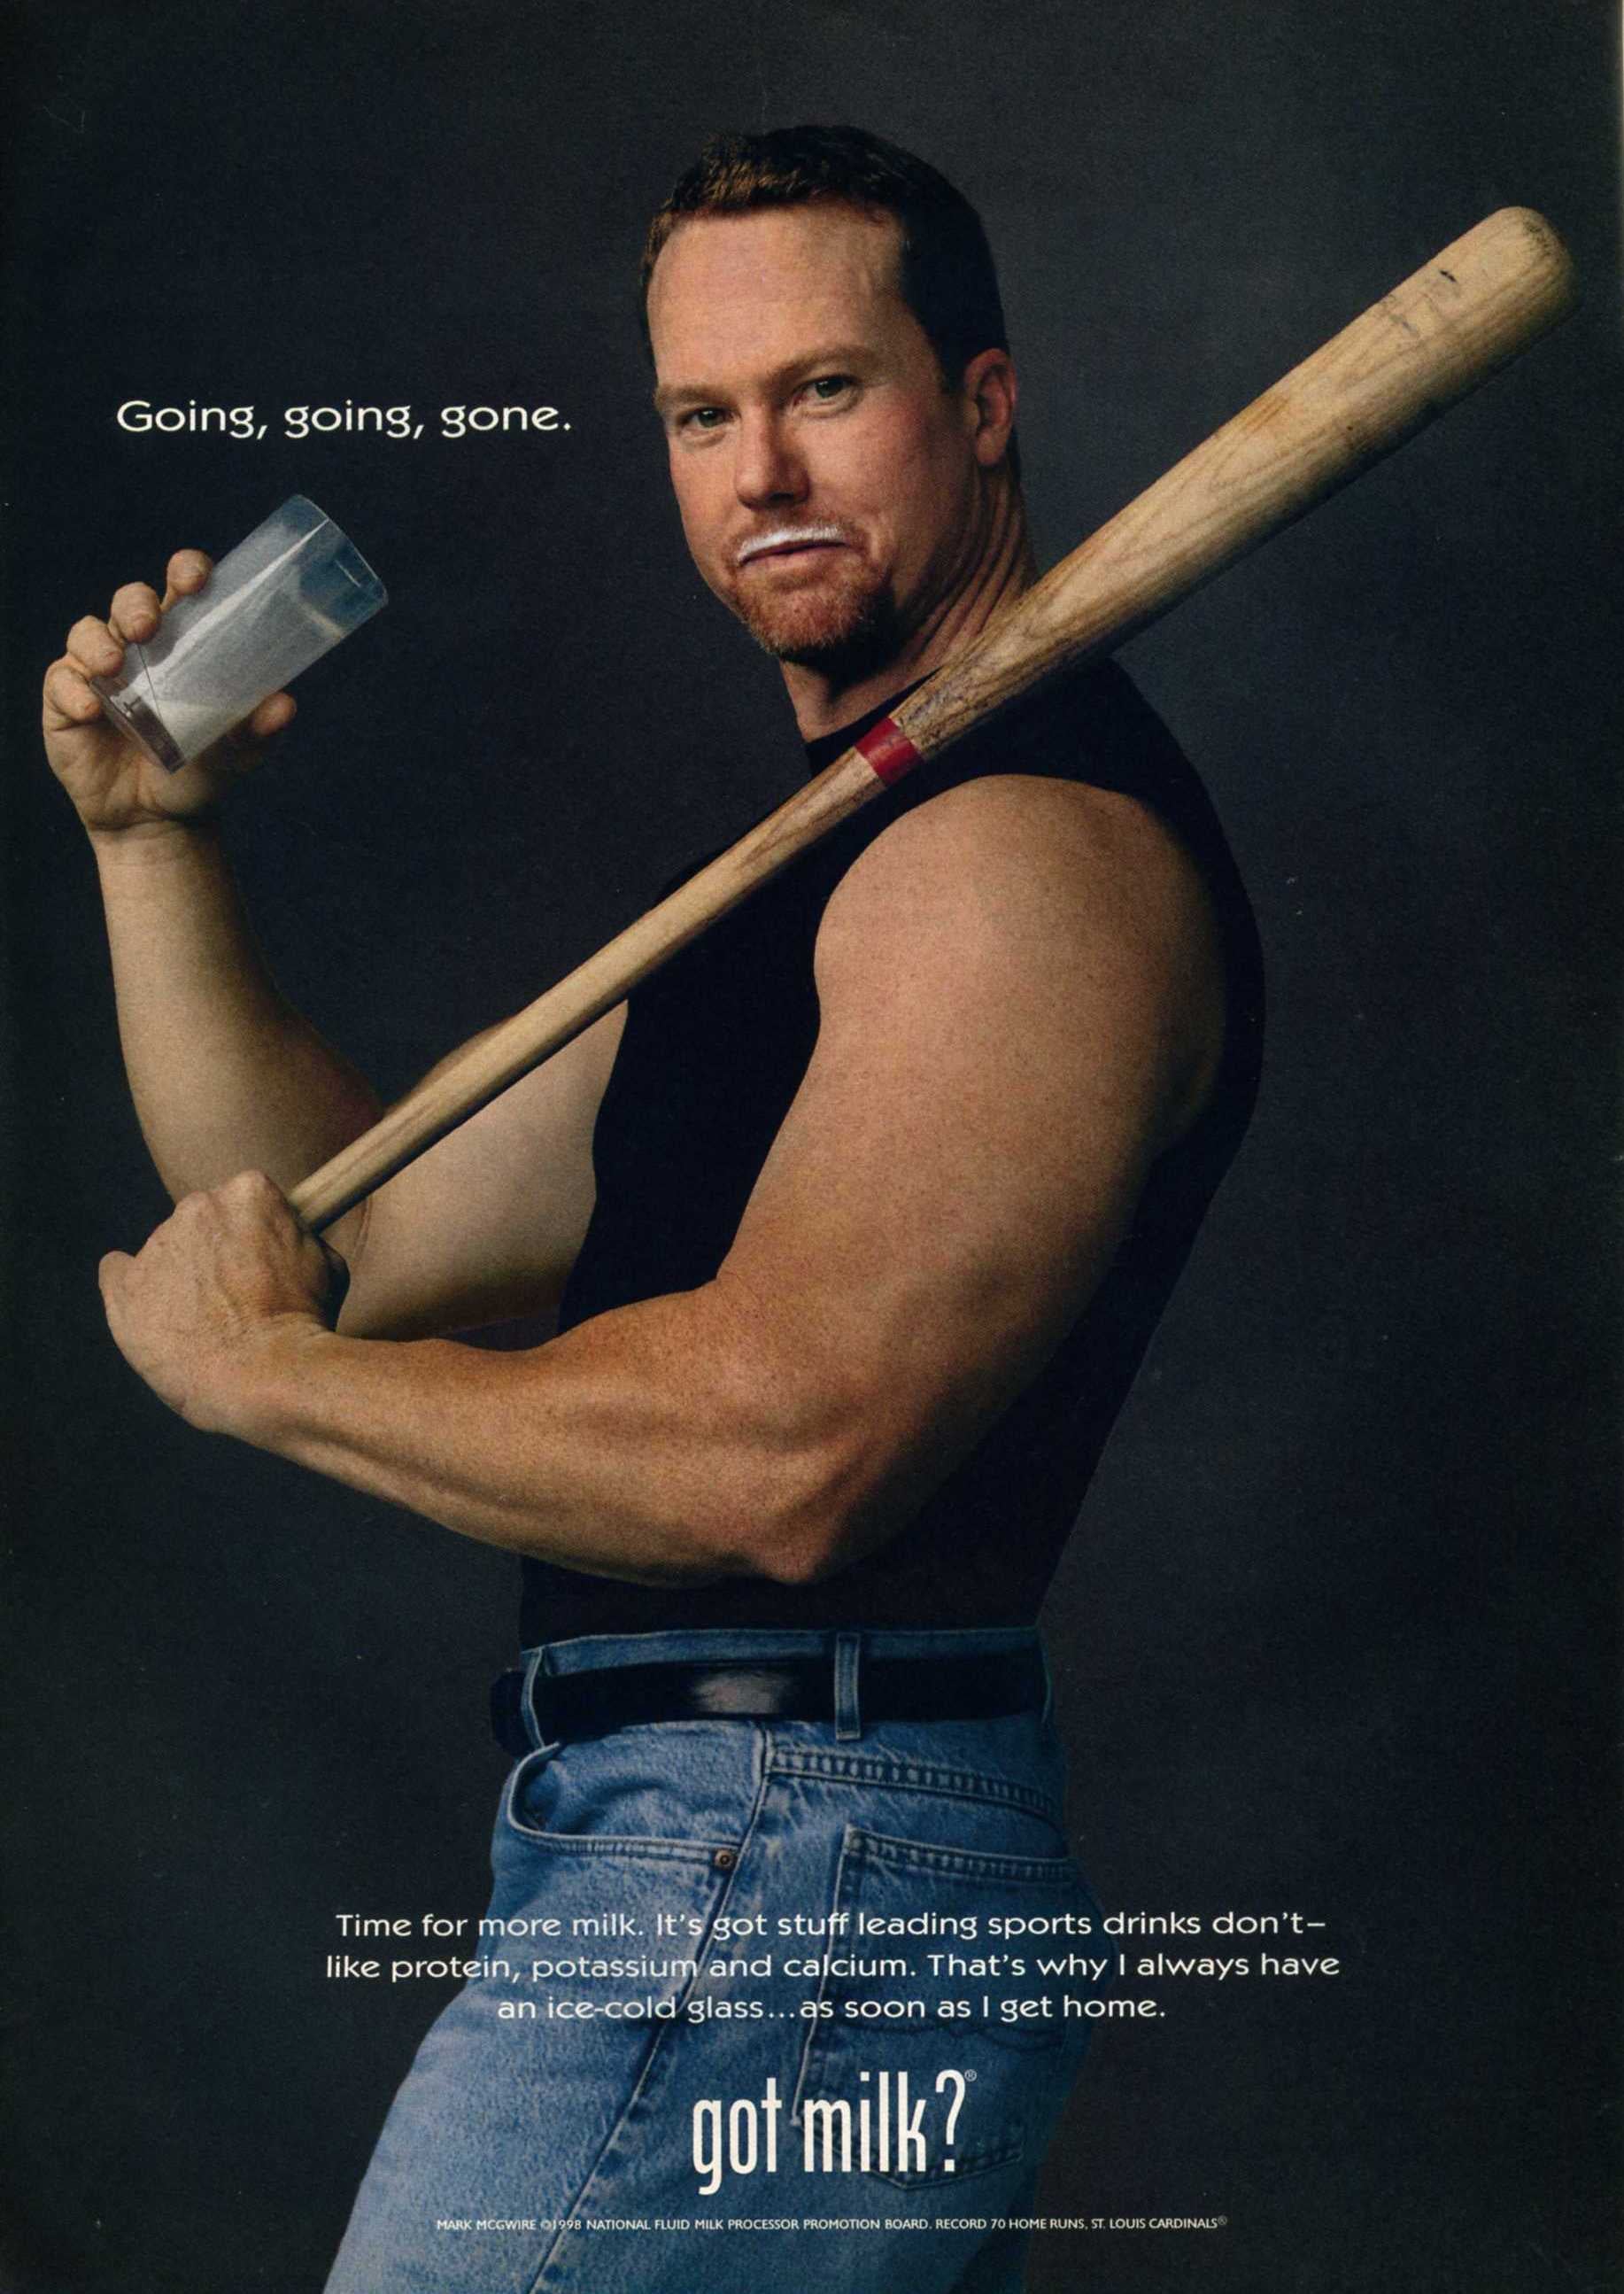 Former Baseball Player Mark Mcgwire Posed With A Bat For His Got The 